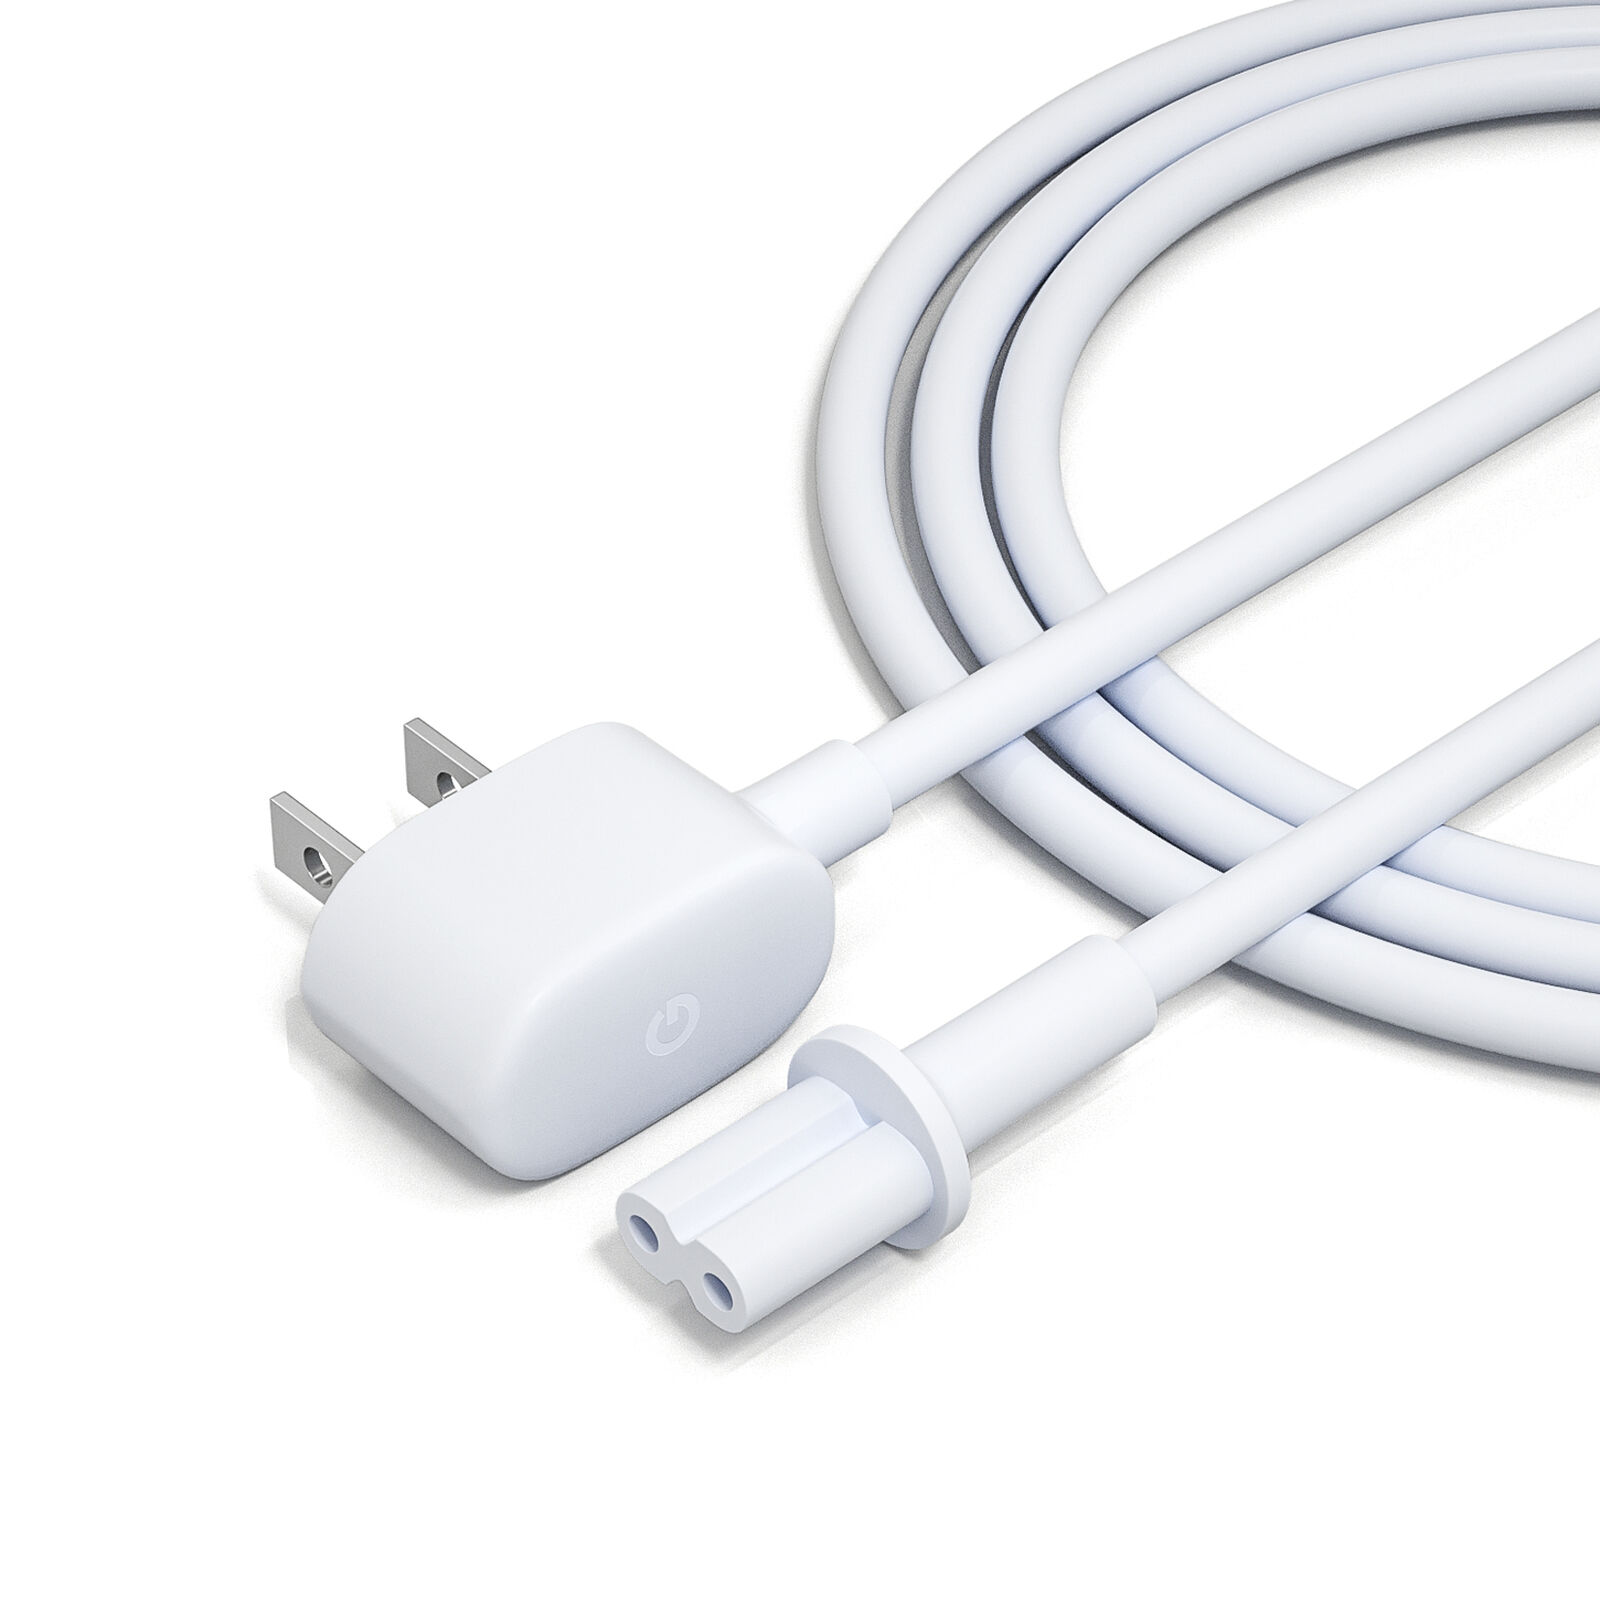 Genuine OEM Google Home Max Power Supply Cable Cord AC Adapter 2M 6FT White Brand: Google Type: